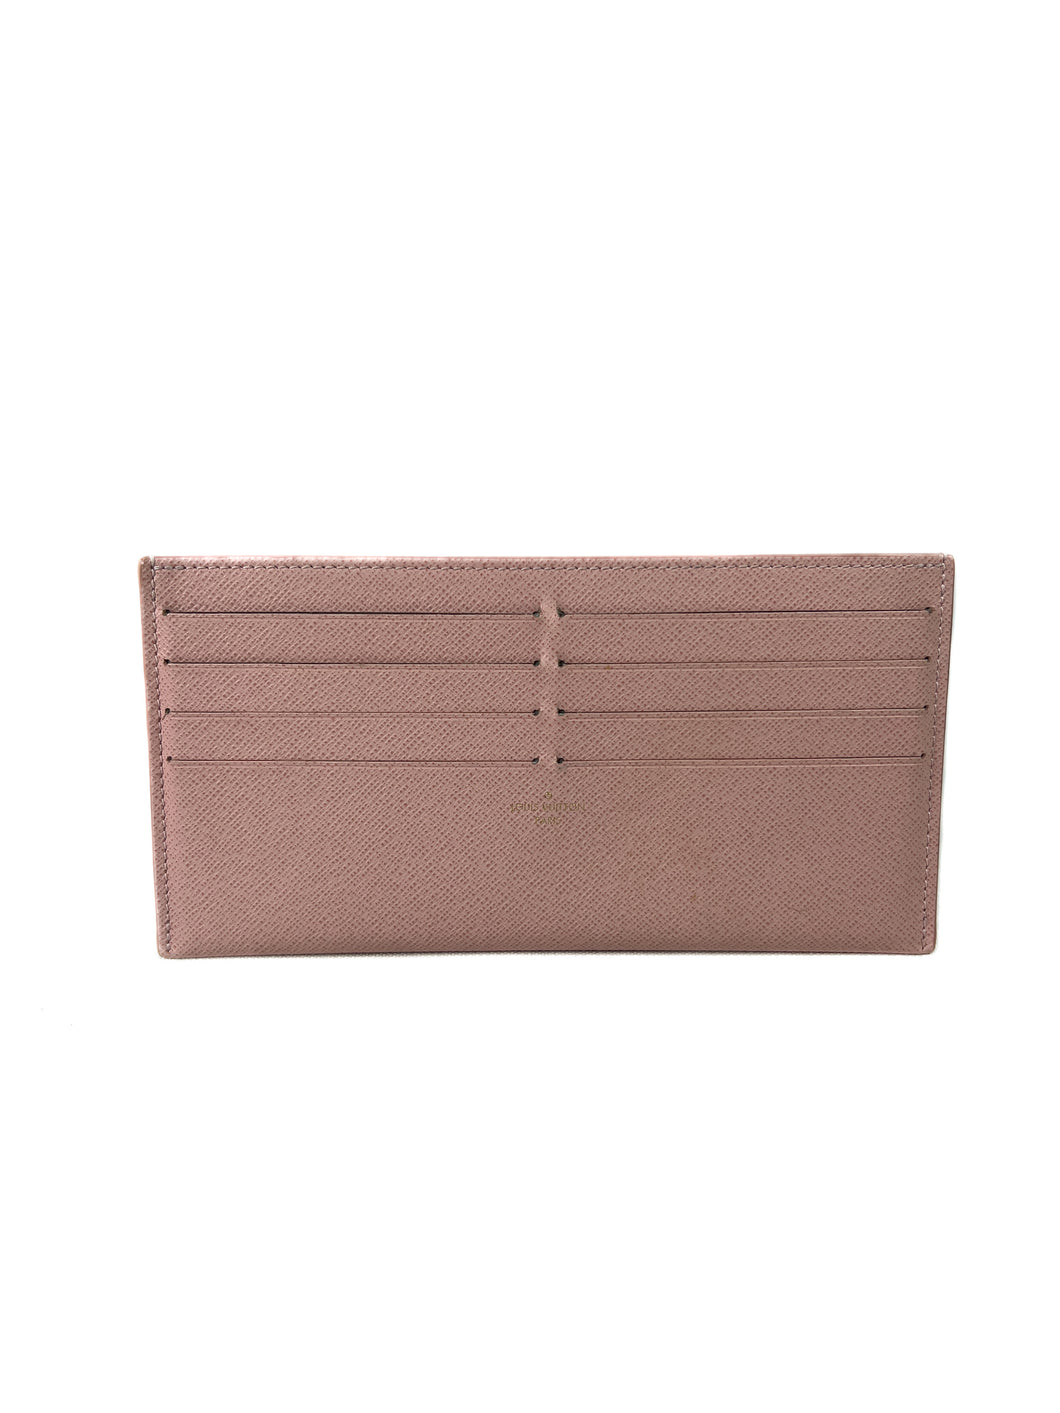 Louis Vuitton SLG Pink Leather Wallet Insert, New - No Box